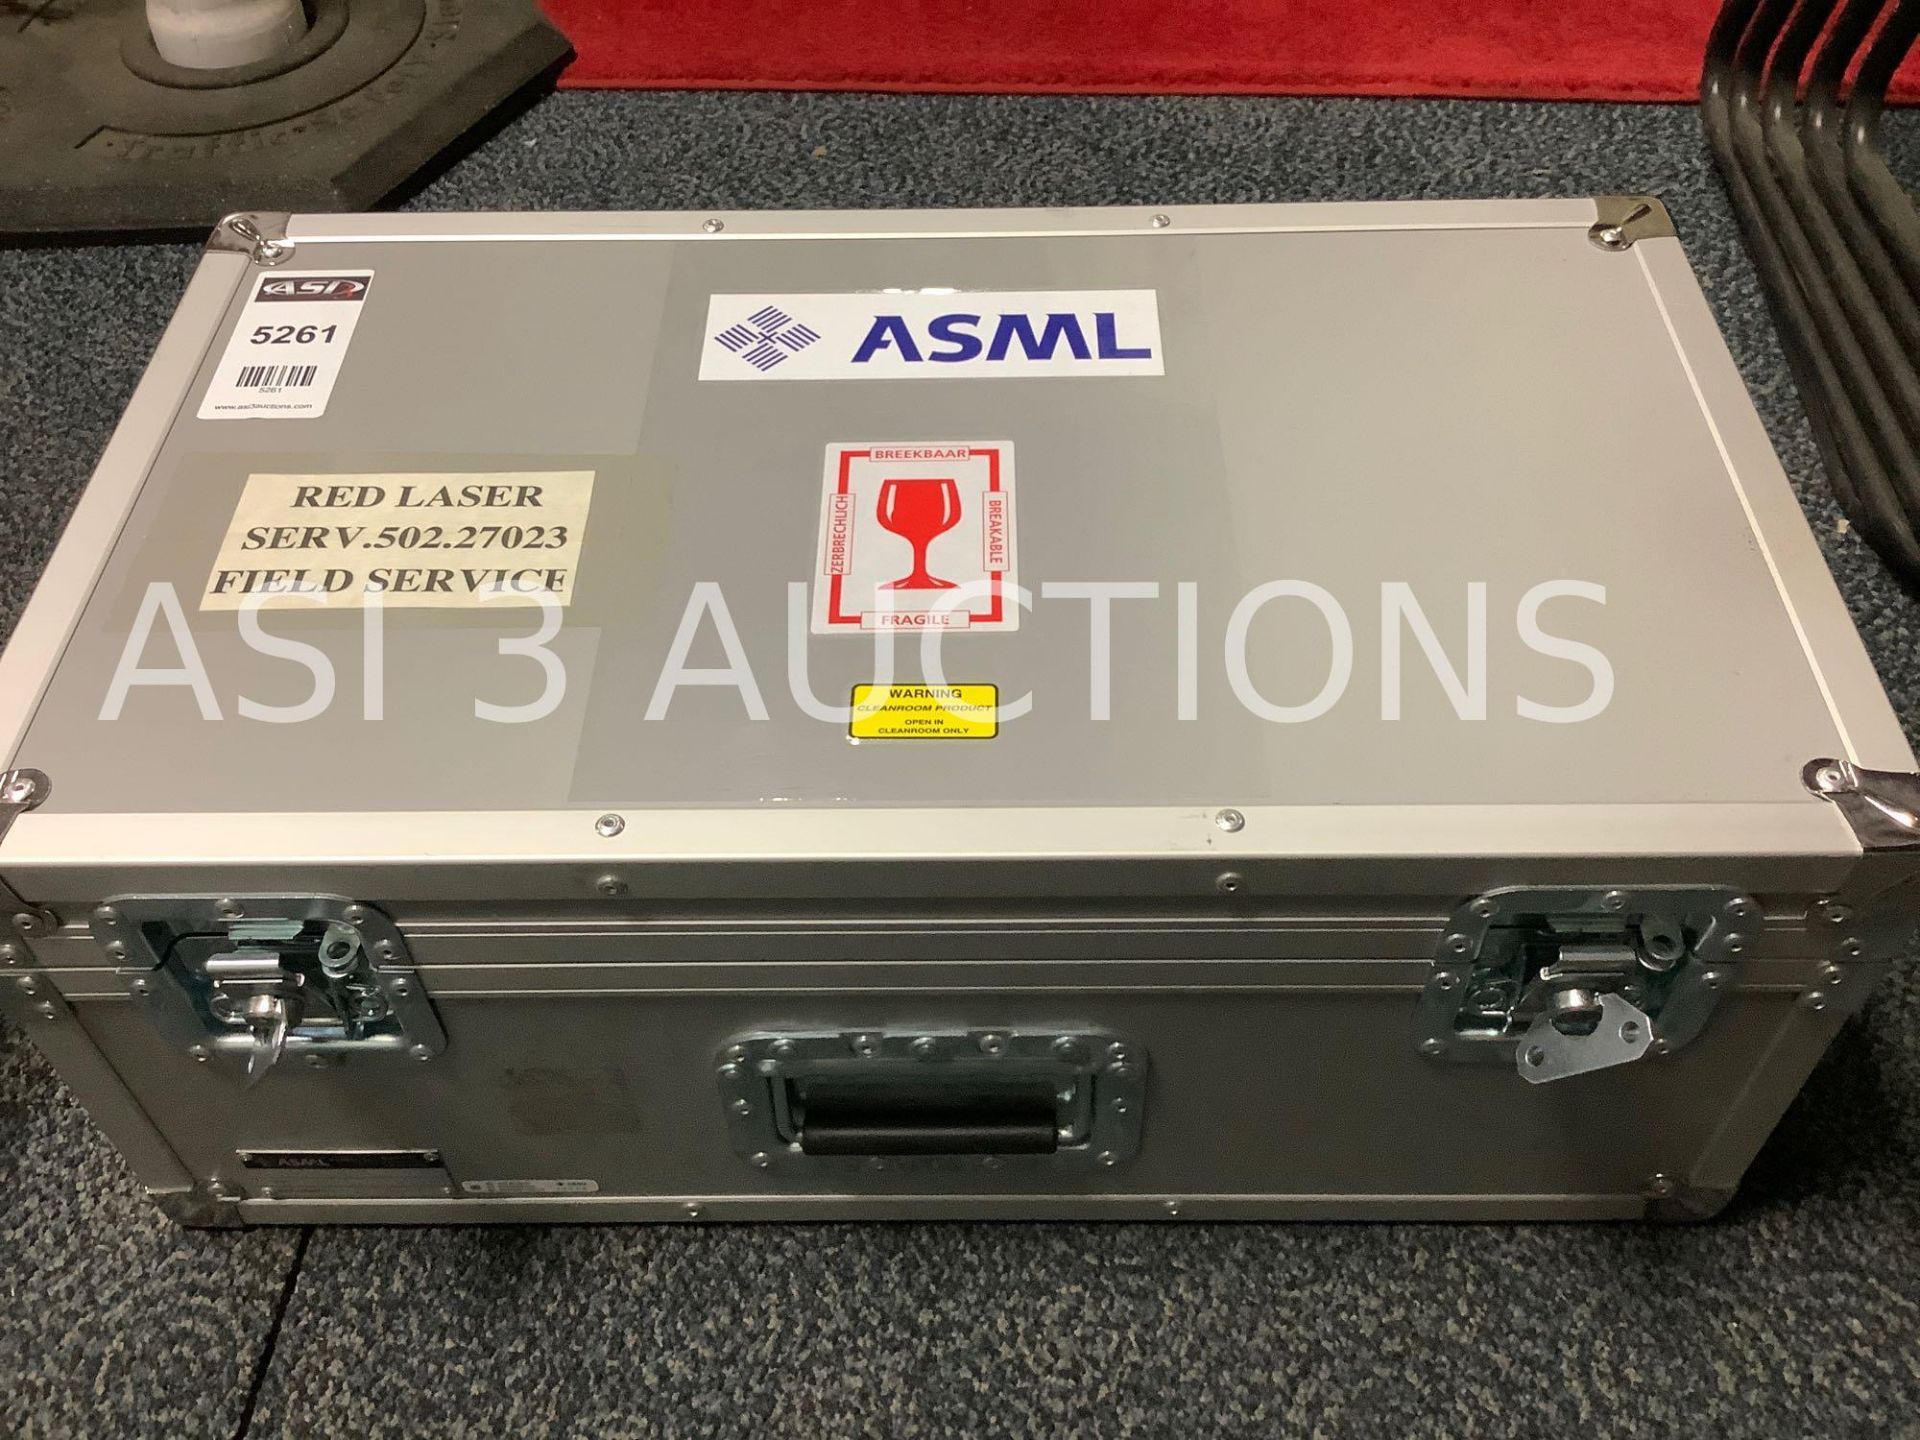 ASML CB 17 PLANT KR30 SERV 502.27023 FIELD SERVICE OFF AXIS RED LASER ( 5261 ) - Image 4 of 6